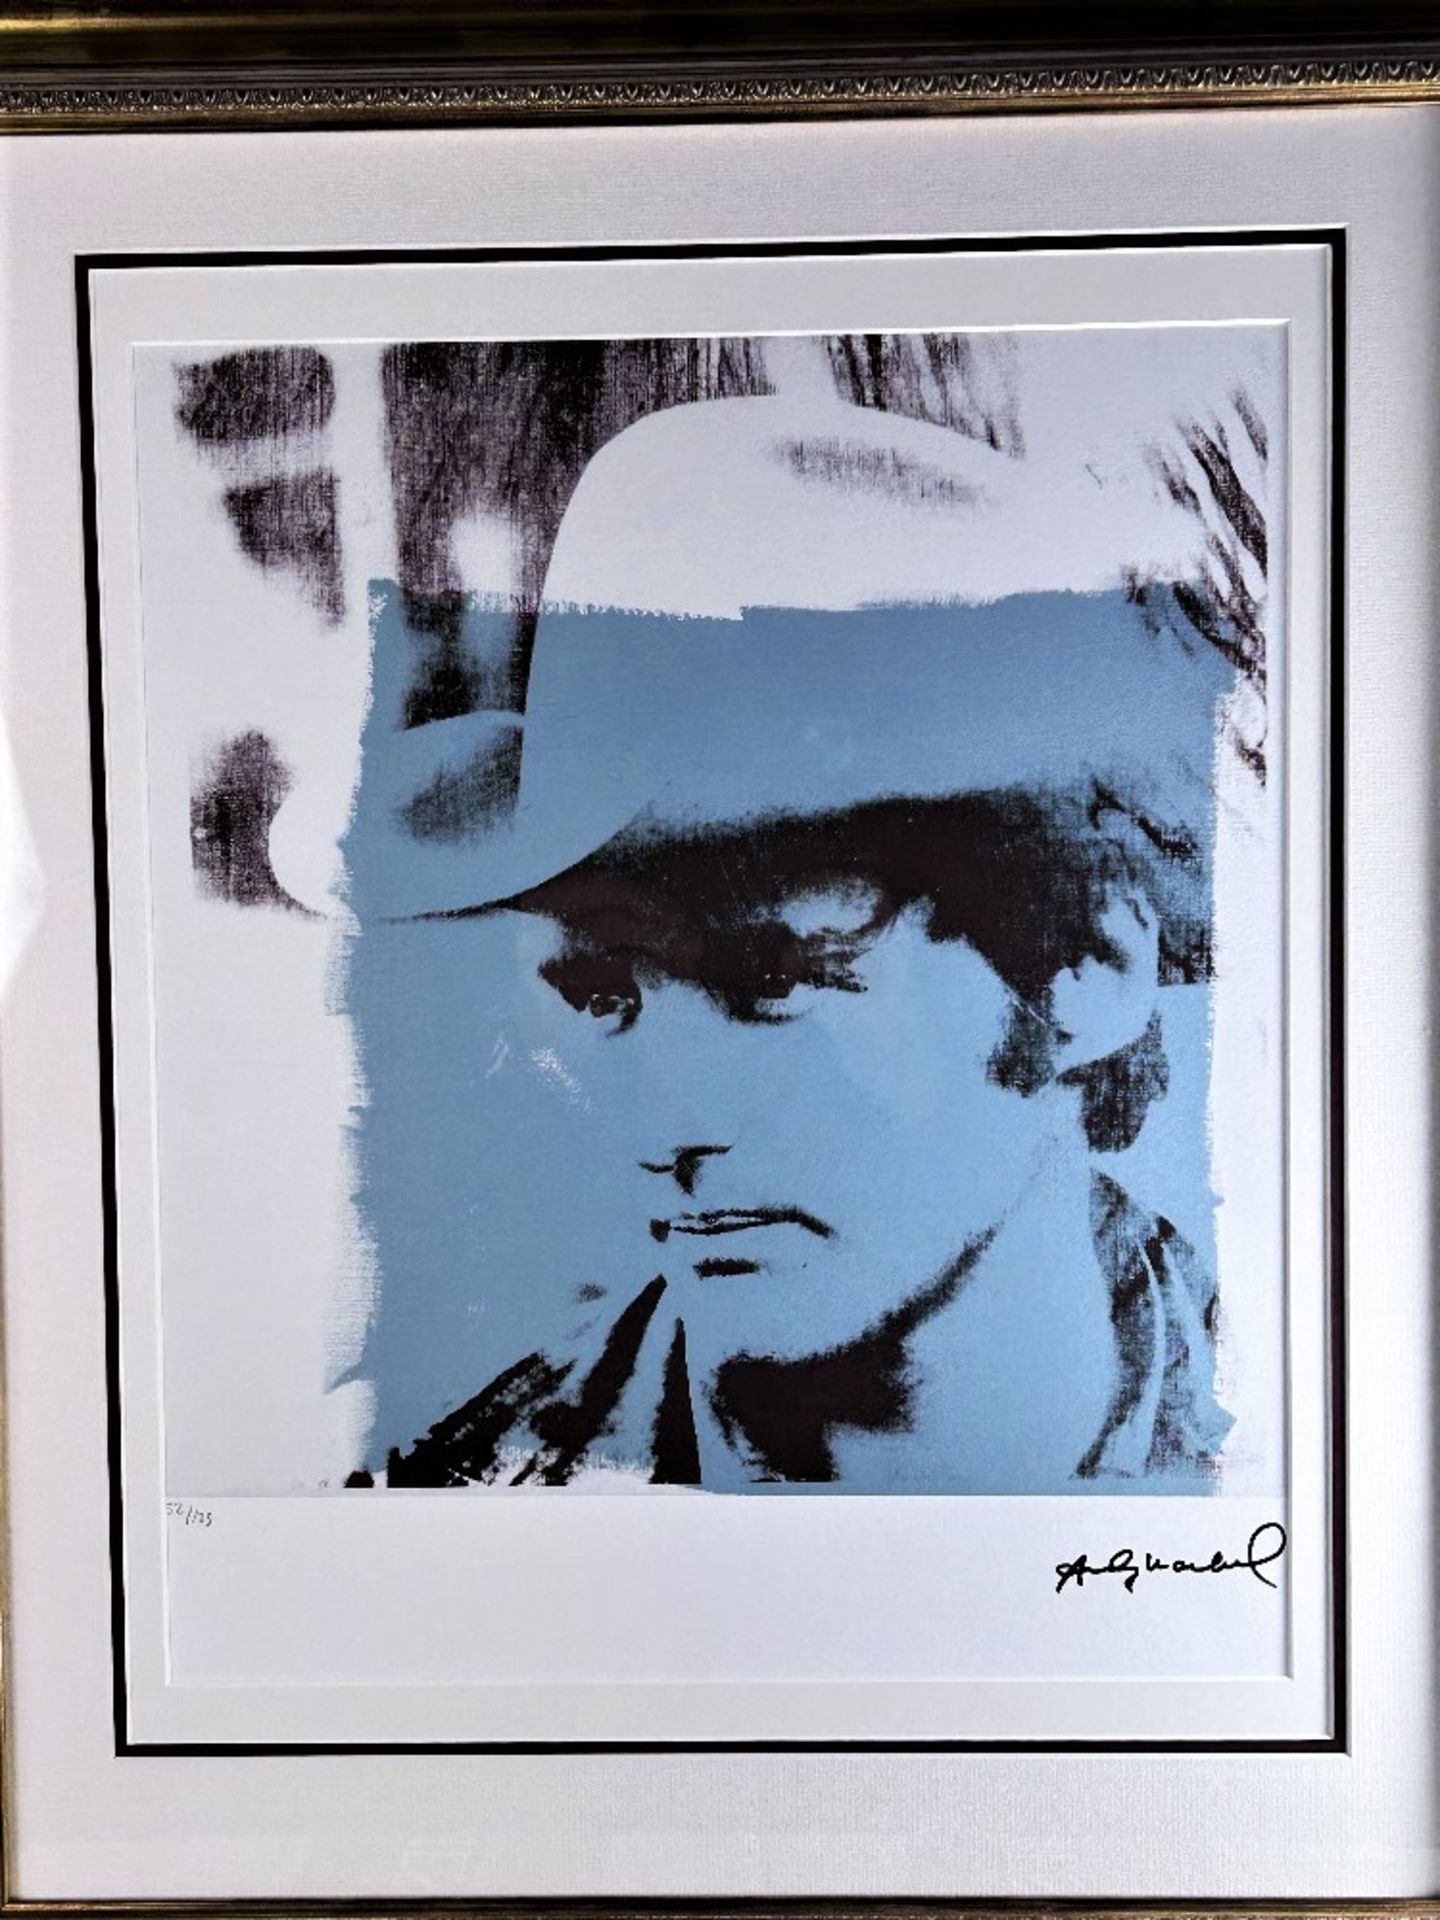 Andy Warhol-(1928-1987) "Dennis Hopper" Numbered Lithograph - Image 2 of 7